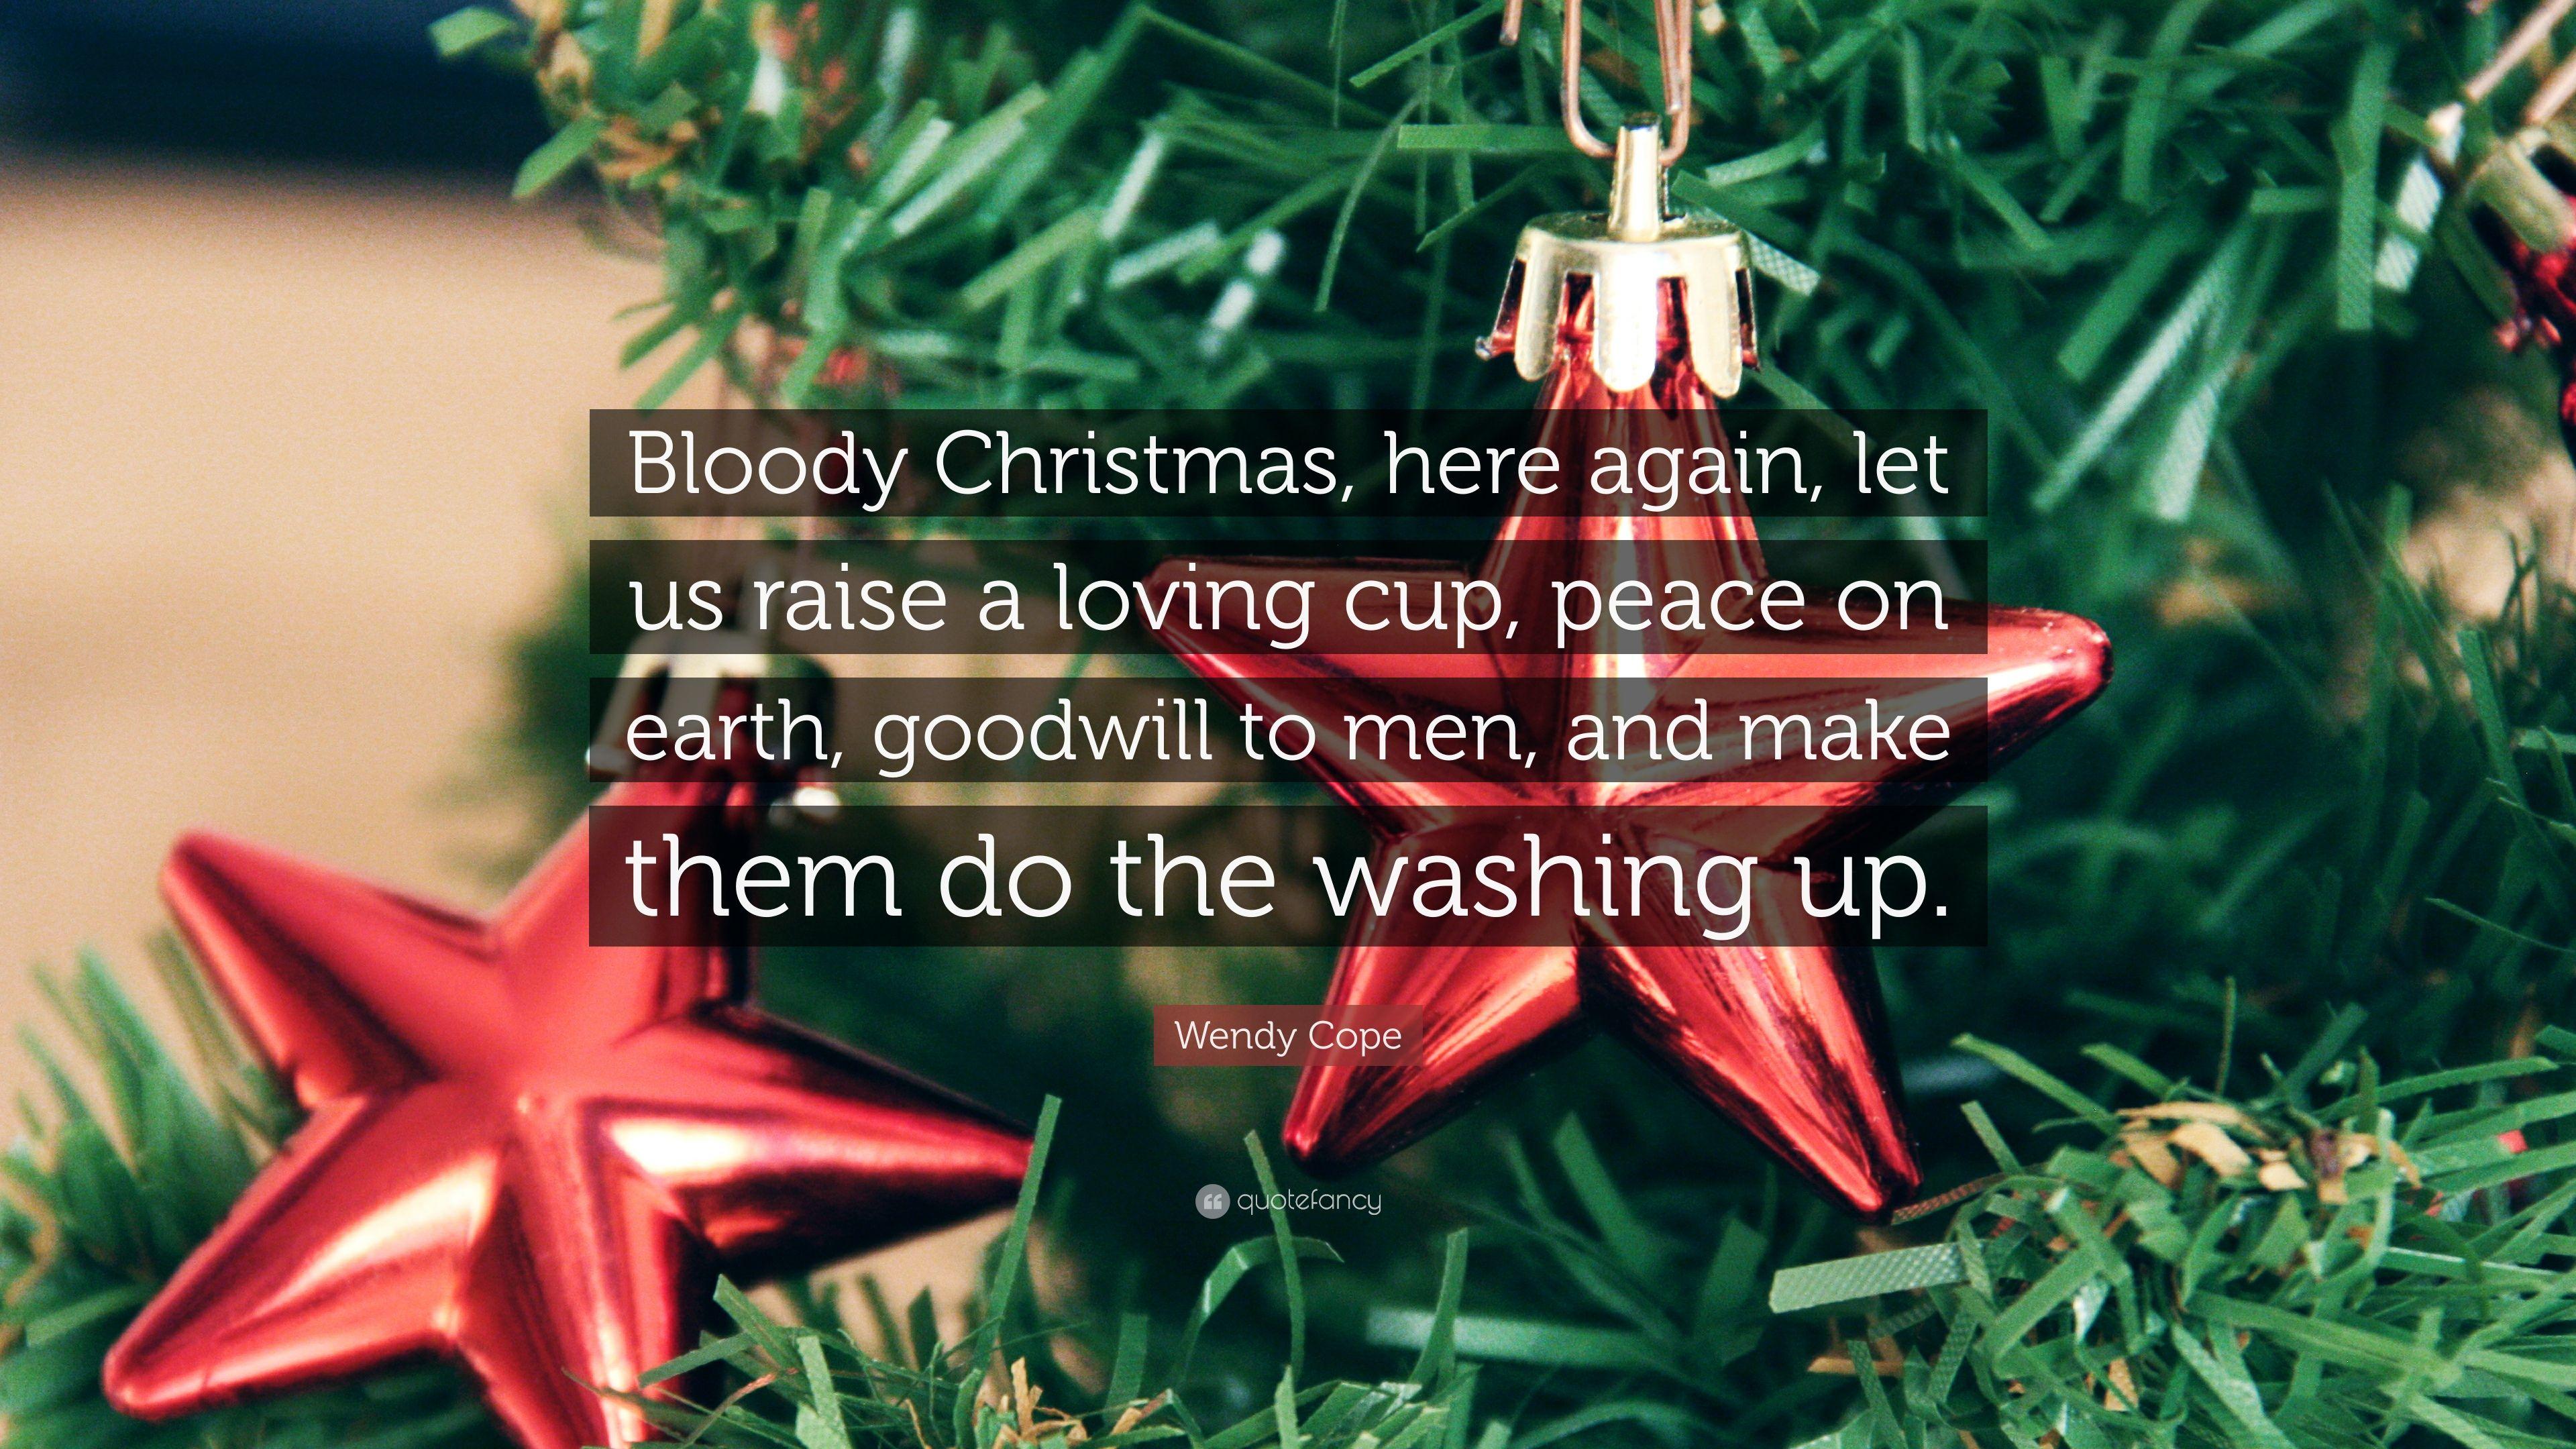 Wendy Cope Quote: “Bloody Christmas, here again, let us raise a